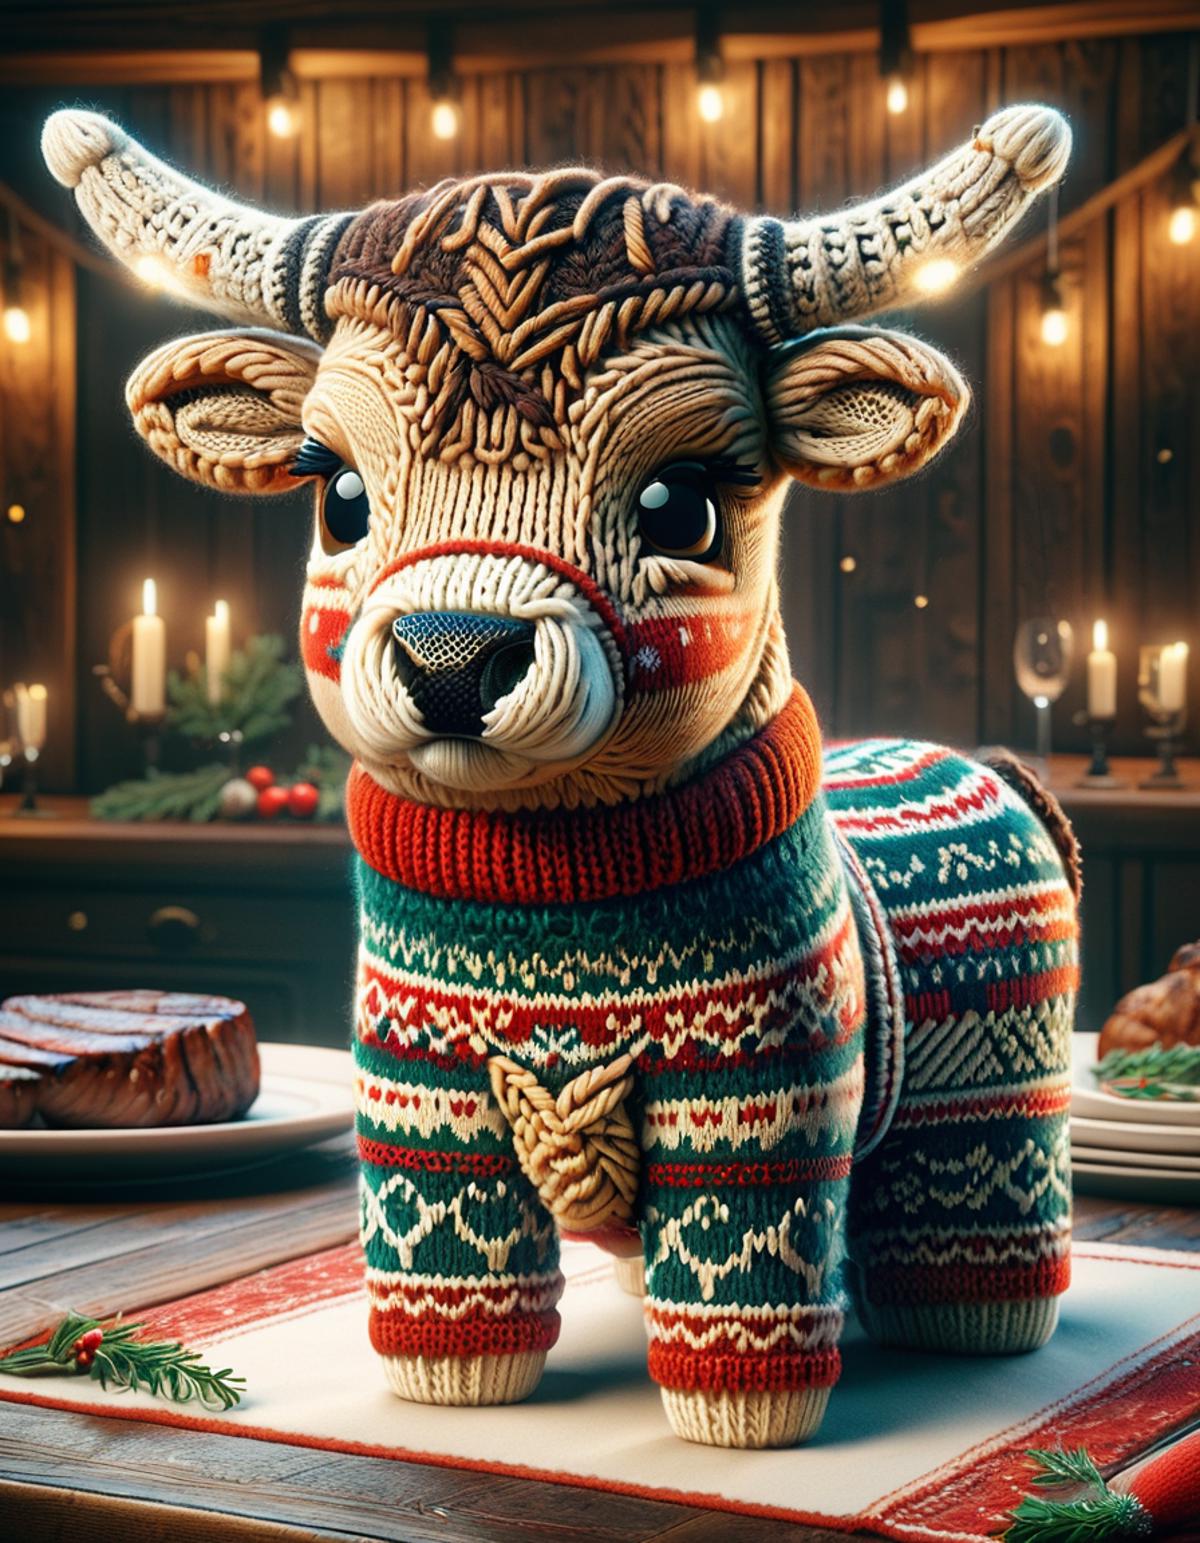 A Christmas-themed stuffed animal with a sweater and scarf.